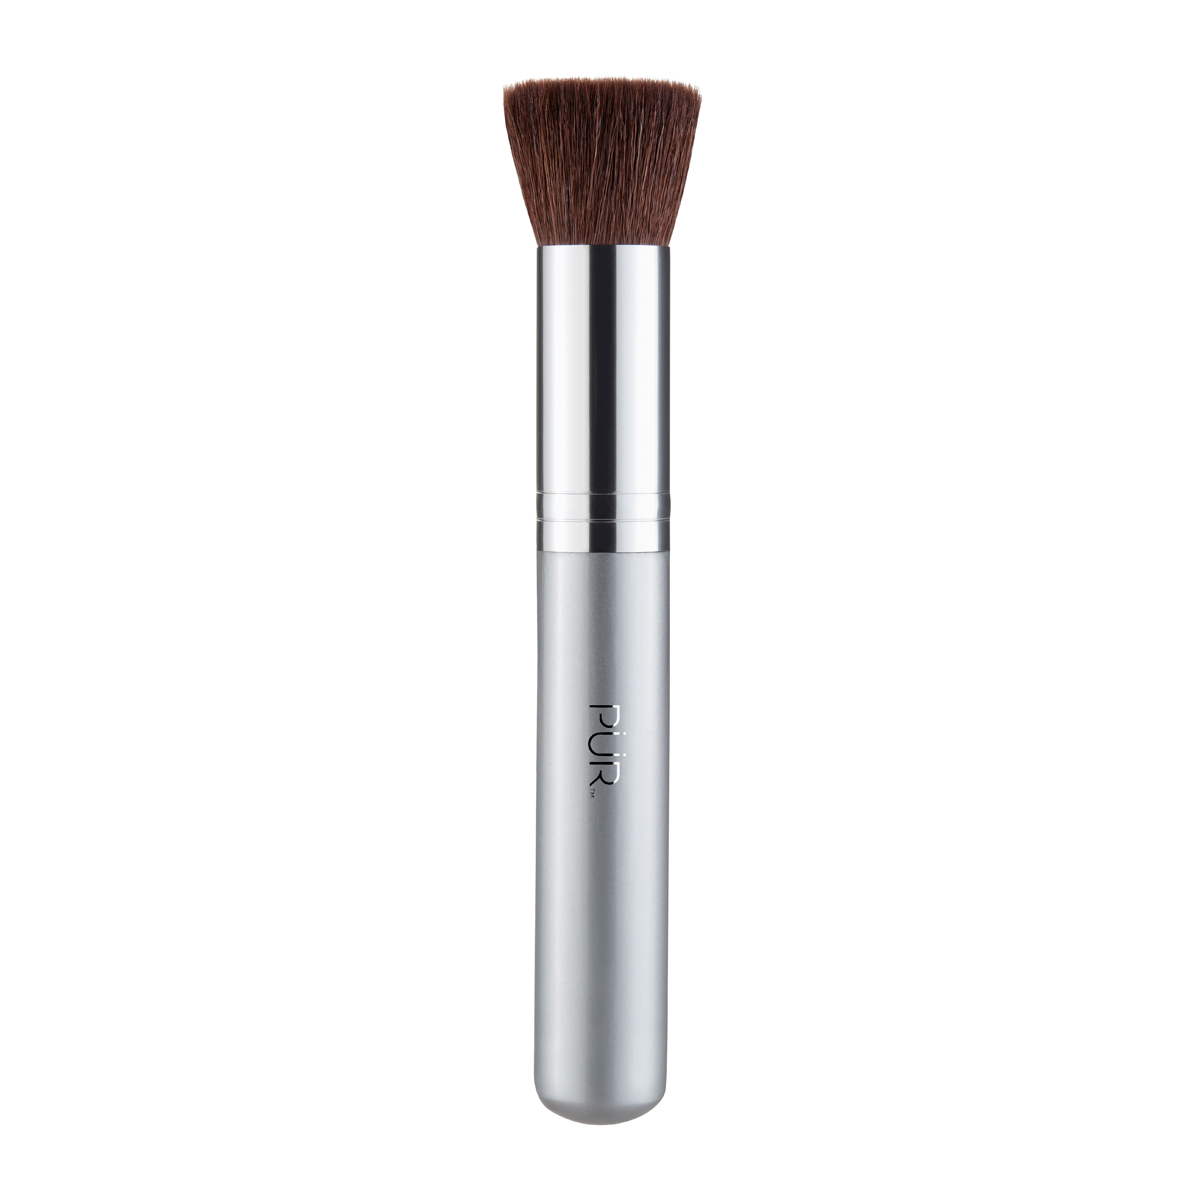 Using the Chisel Brush, apply 4-in-1 Pressed Mineral Makeup in circular motions to achieve an even and flawless-looking finish. 